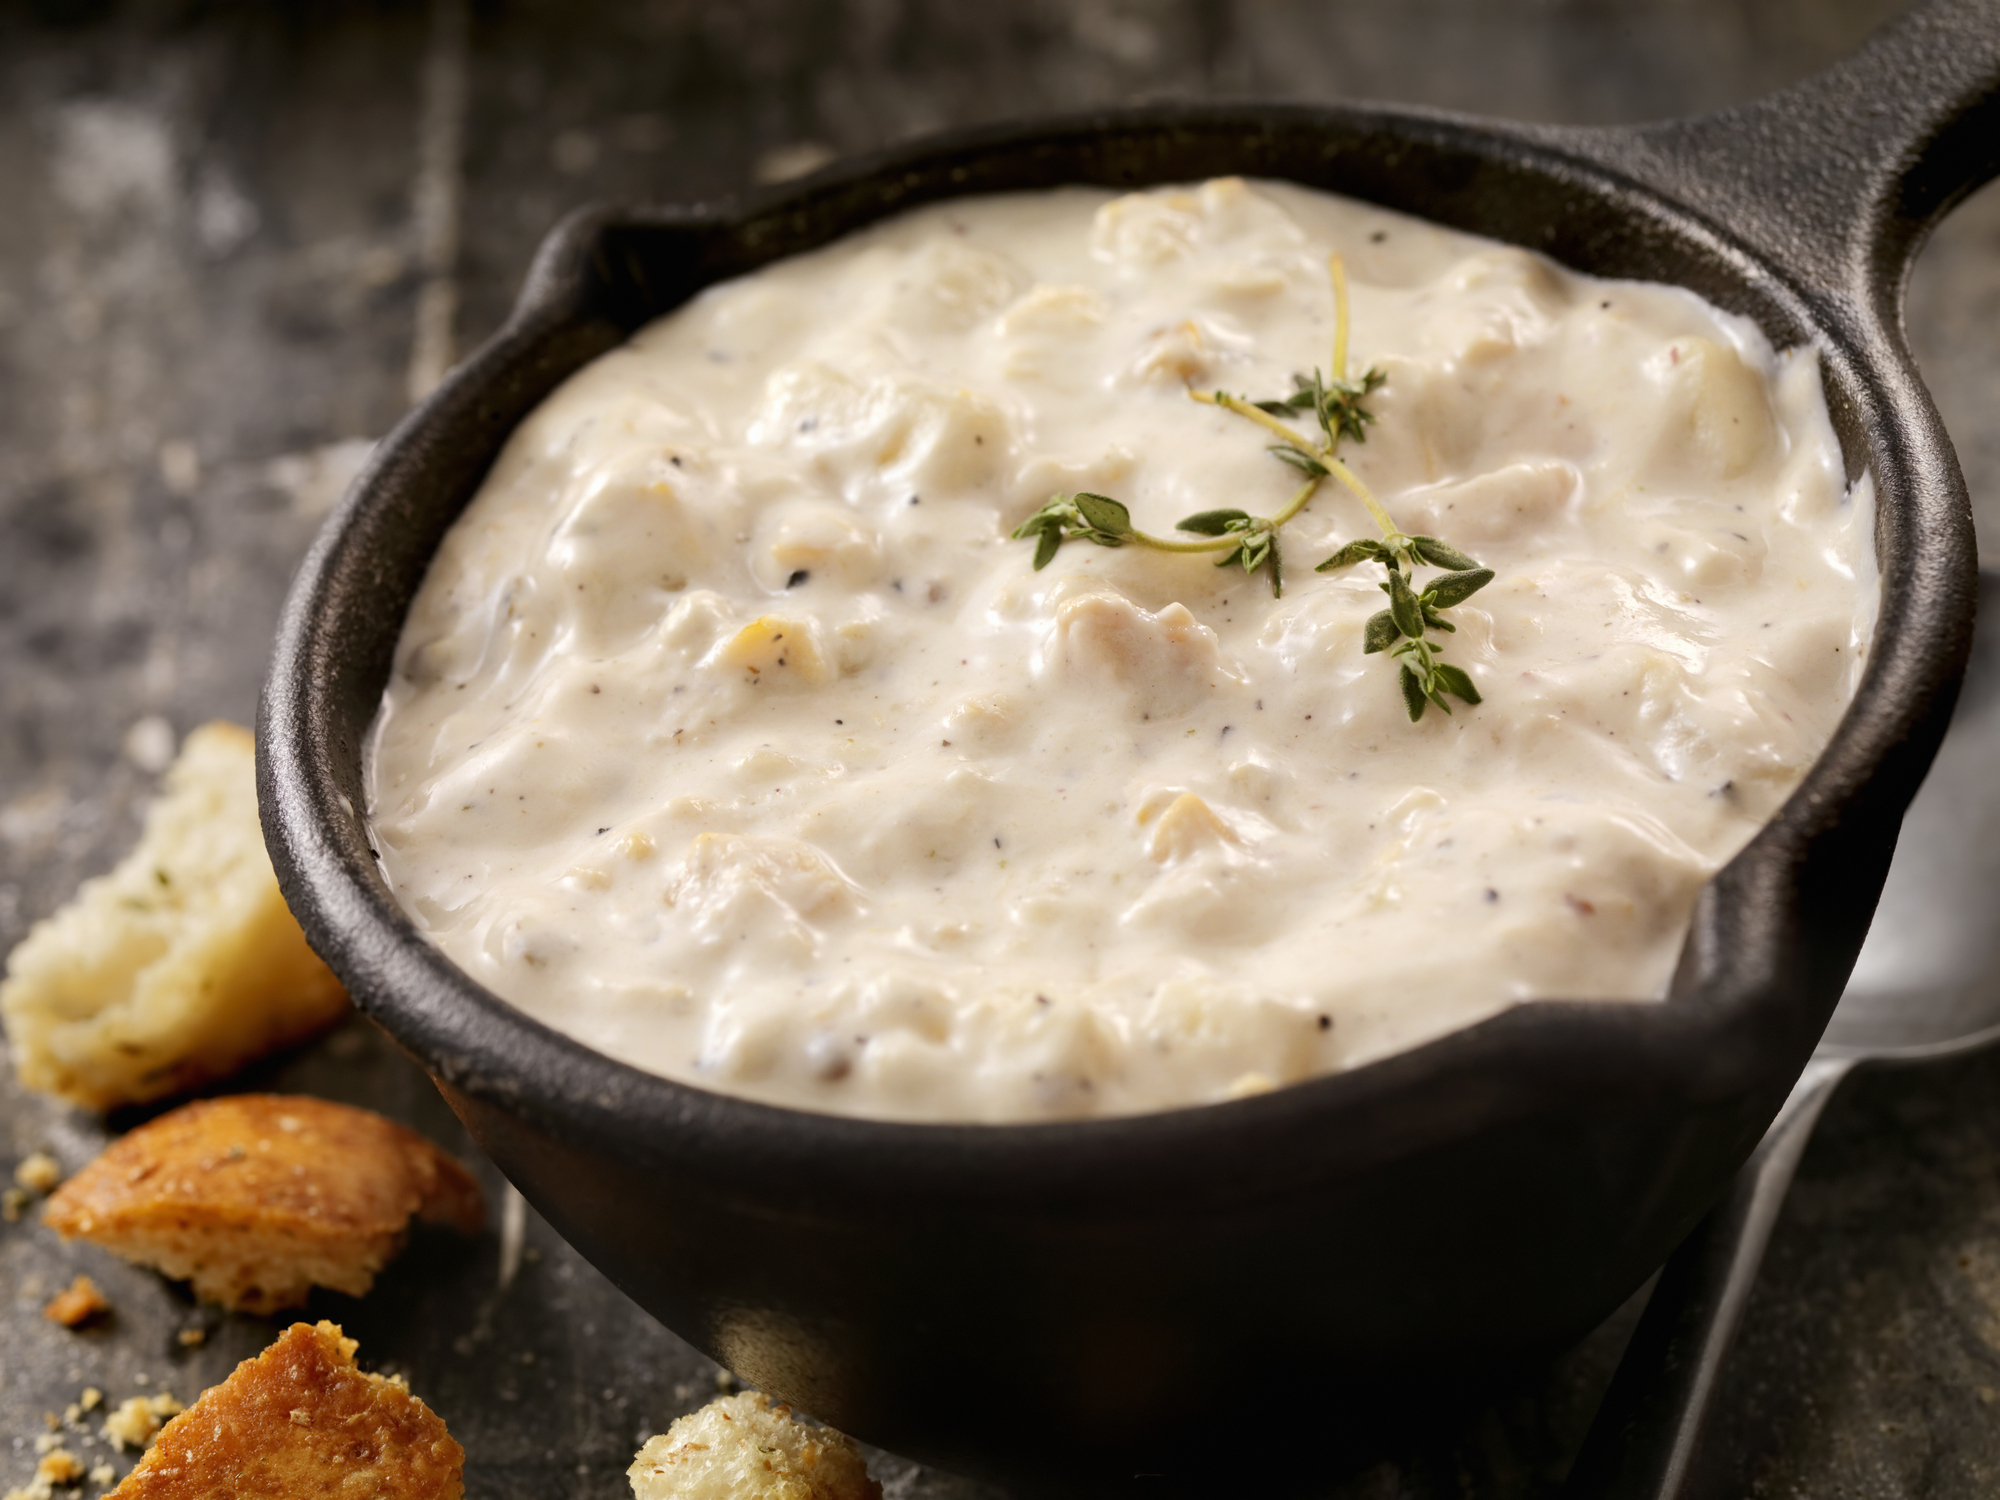 Creamy soup garnished with herbs in a black bowl, served with crumbled bread on the side